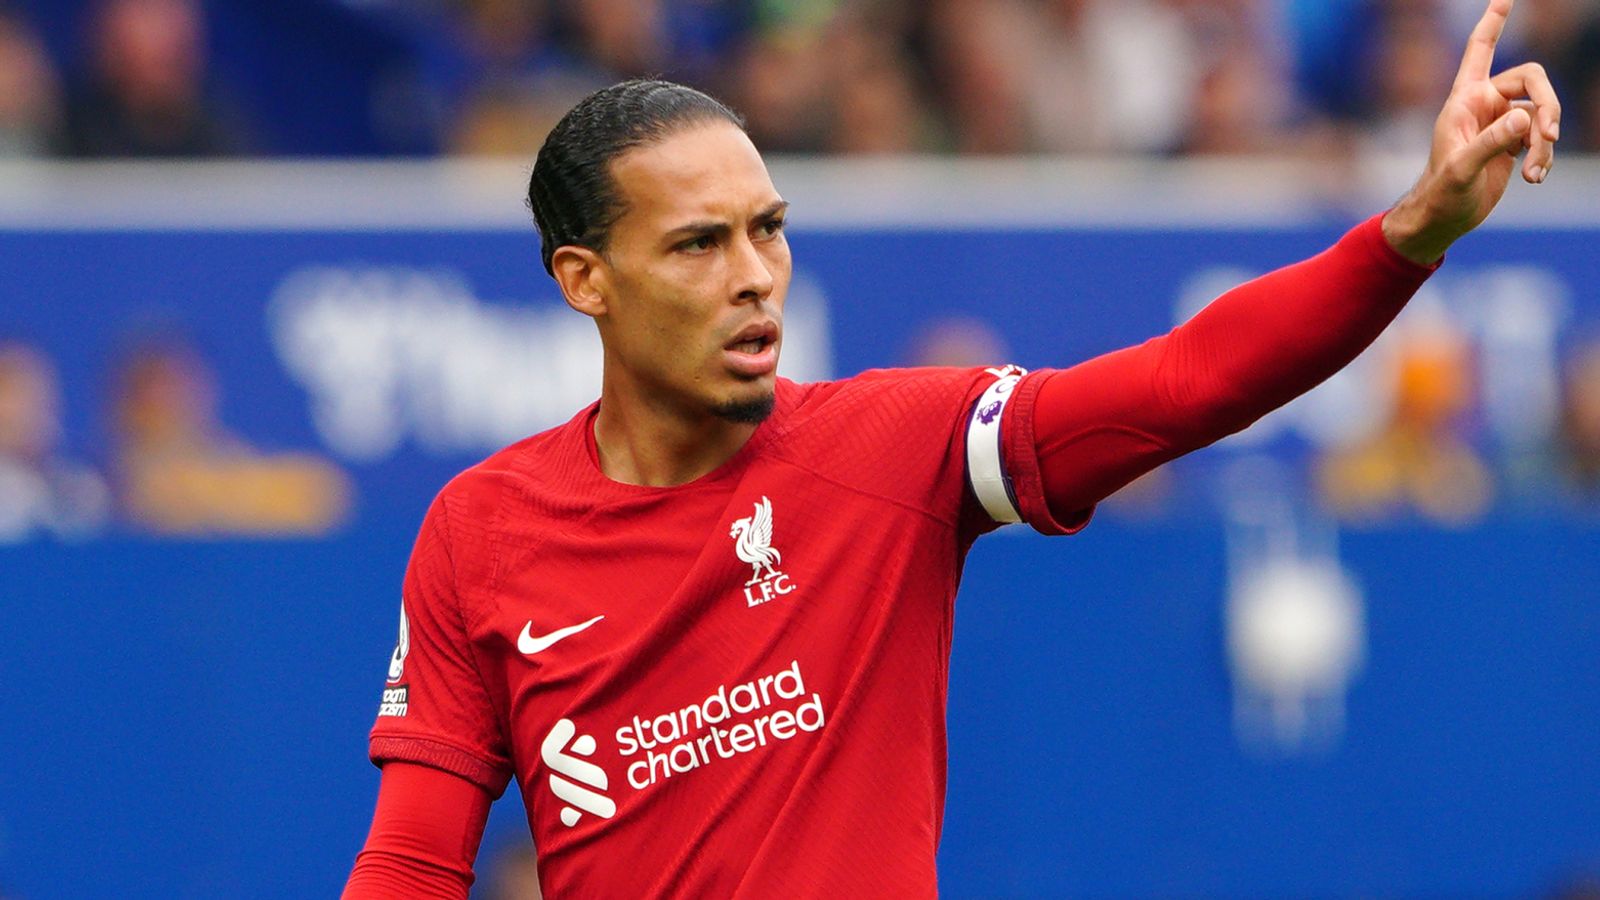 Everton boss Frank Lampard claims Liverpool’s Virgil van Dijk should have had red card following Amadou Onana challenge